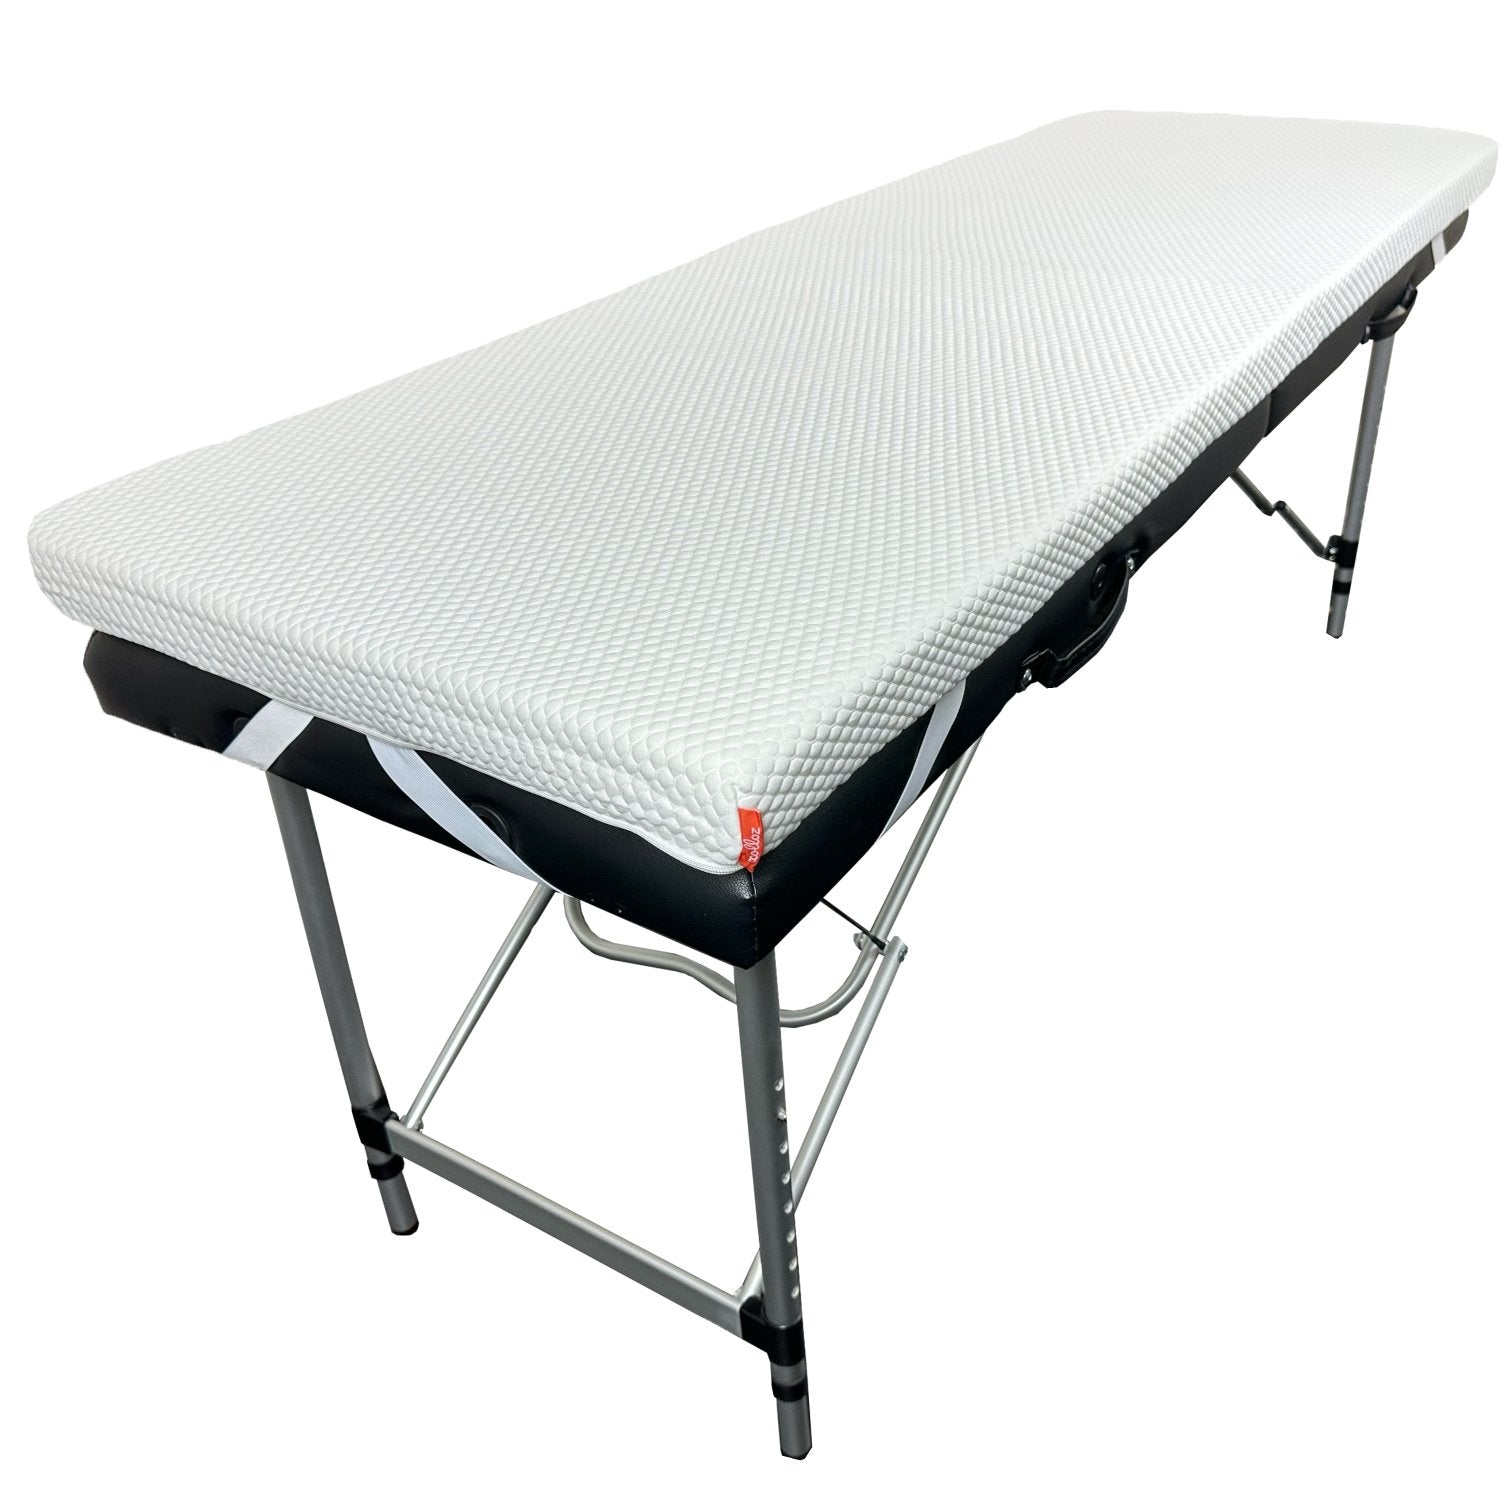 Best Deal for Foam Mattress Topper for Massage Table,Lash Bed